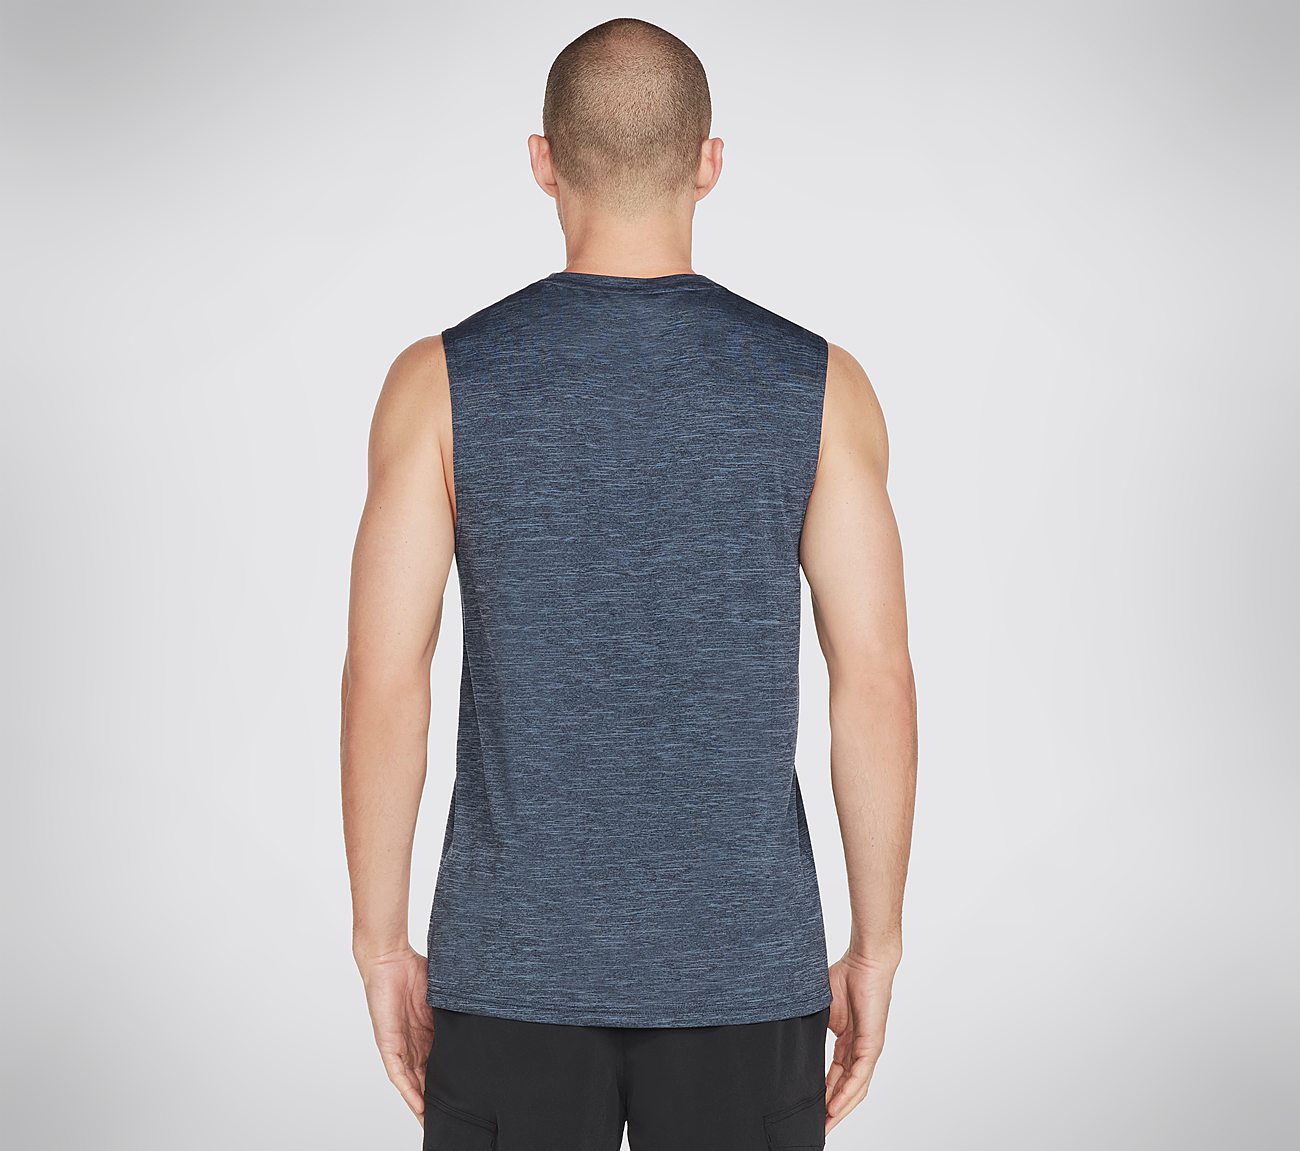 ON THE ROAD MUSCLE TANK, BLUE/GREY Apparels Top View